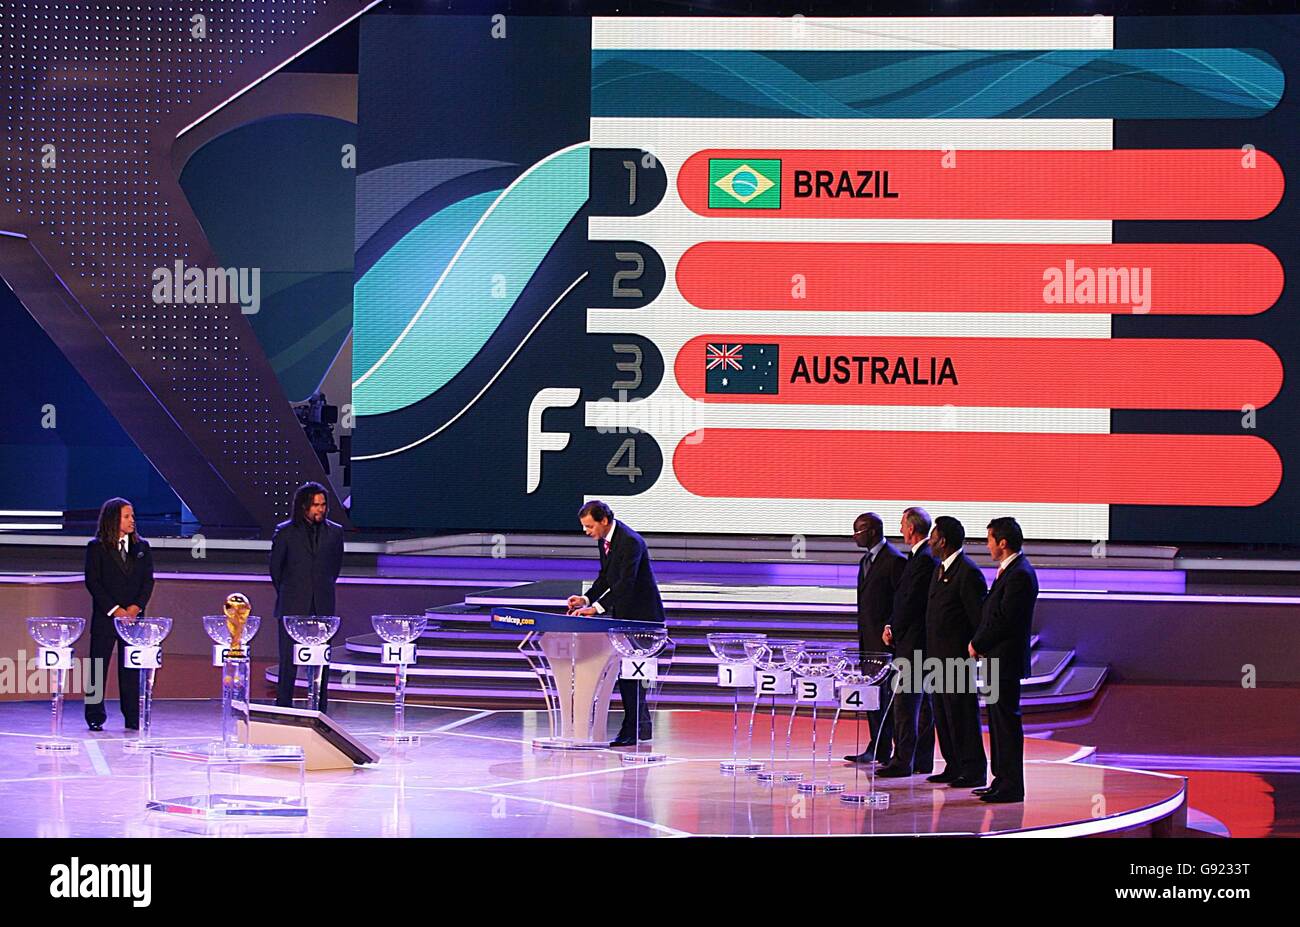 Soccer - 2006 FIFA World Cup Germany - Final Draw - Messe Leipzig. Brazil are grouped with Australia in the 2006 FIFA World Cup final draw. Stock Photo